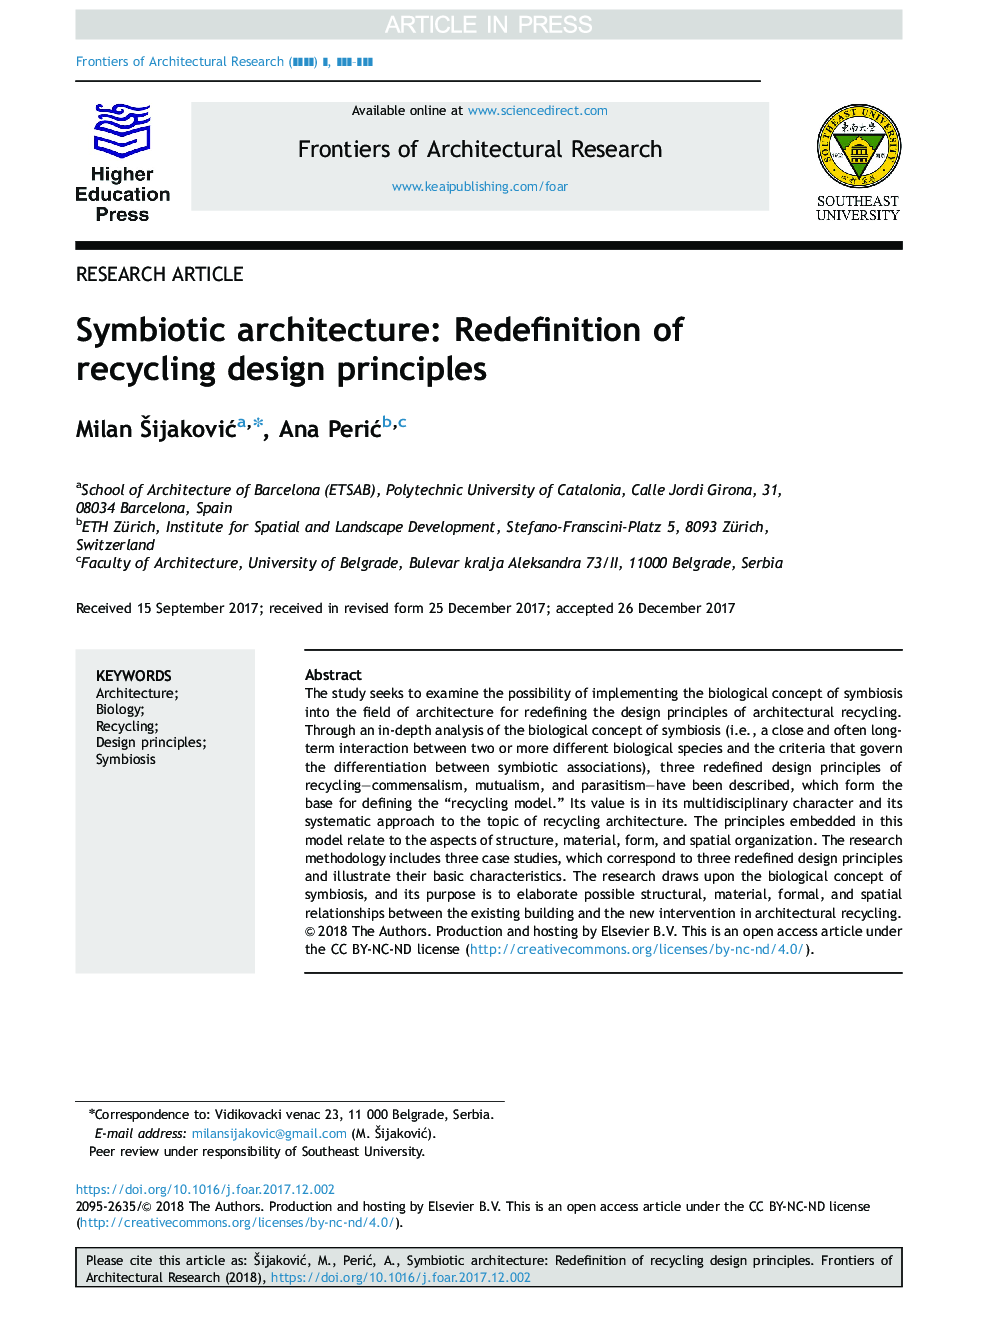 Symbiotic architecture: Redefinition of recycling design principles